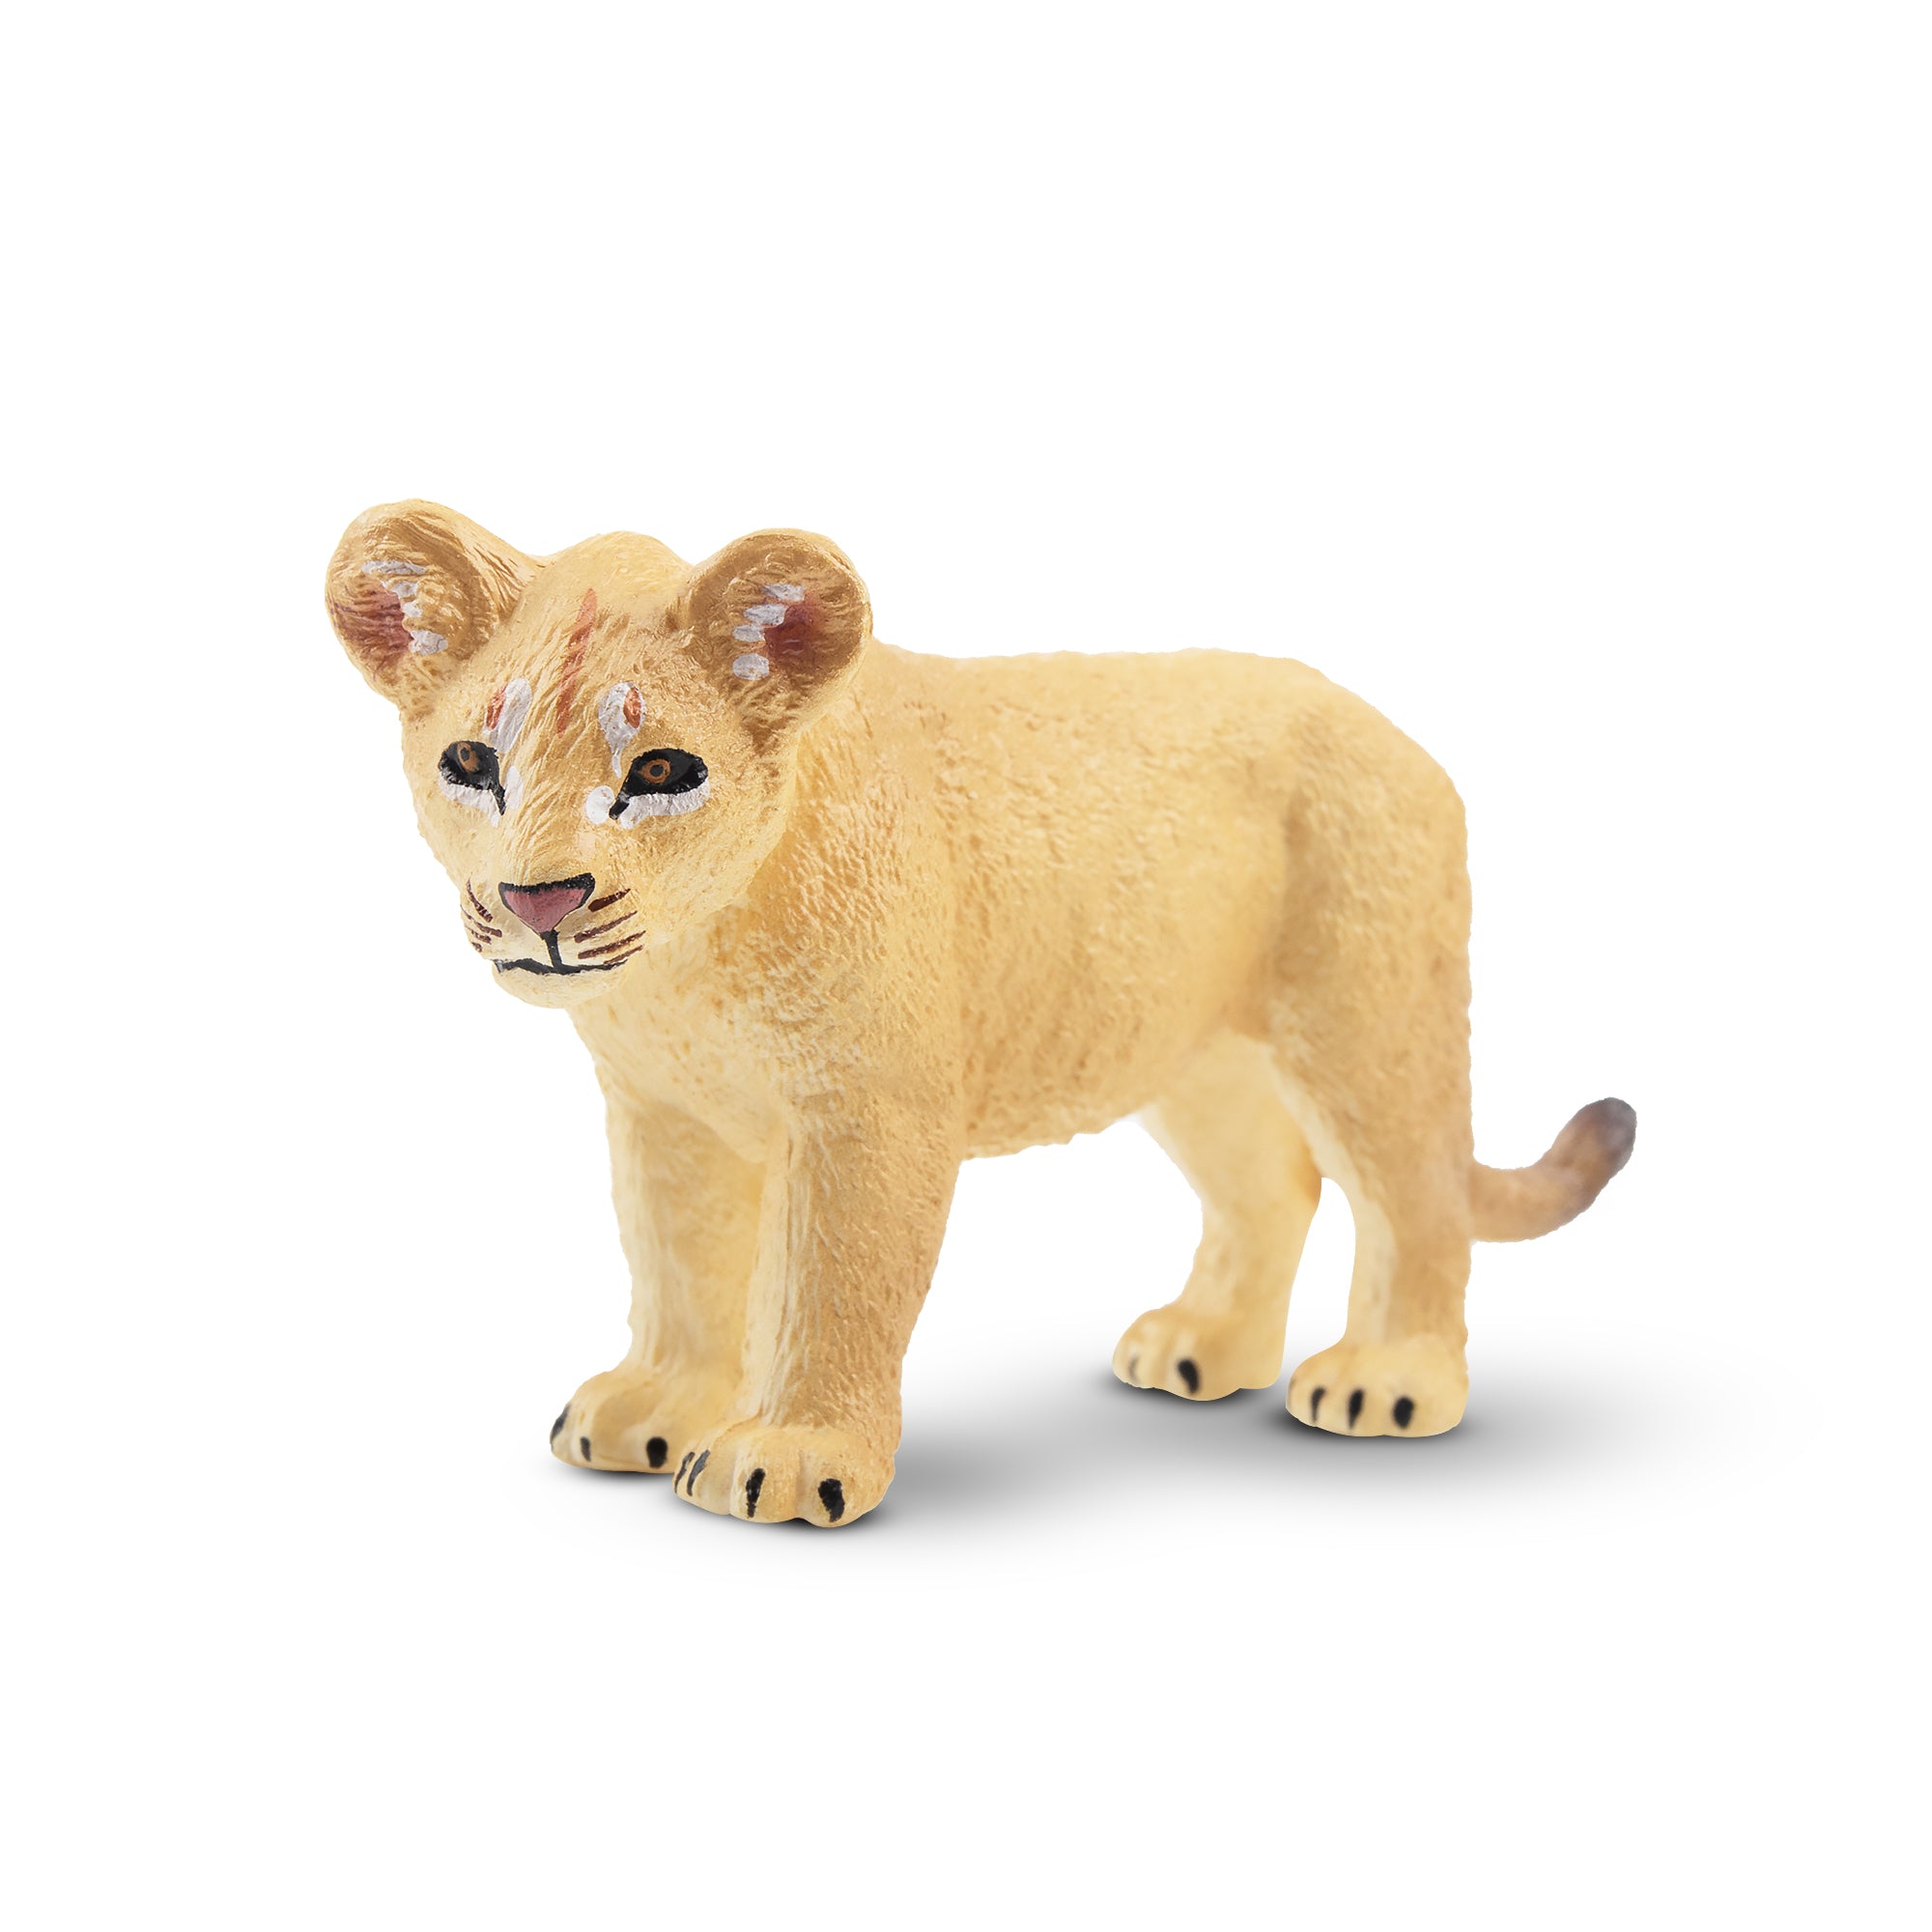 Toymany Standing Lion Cub Figurine Toy - 1-front